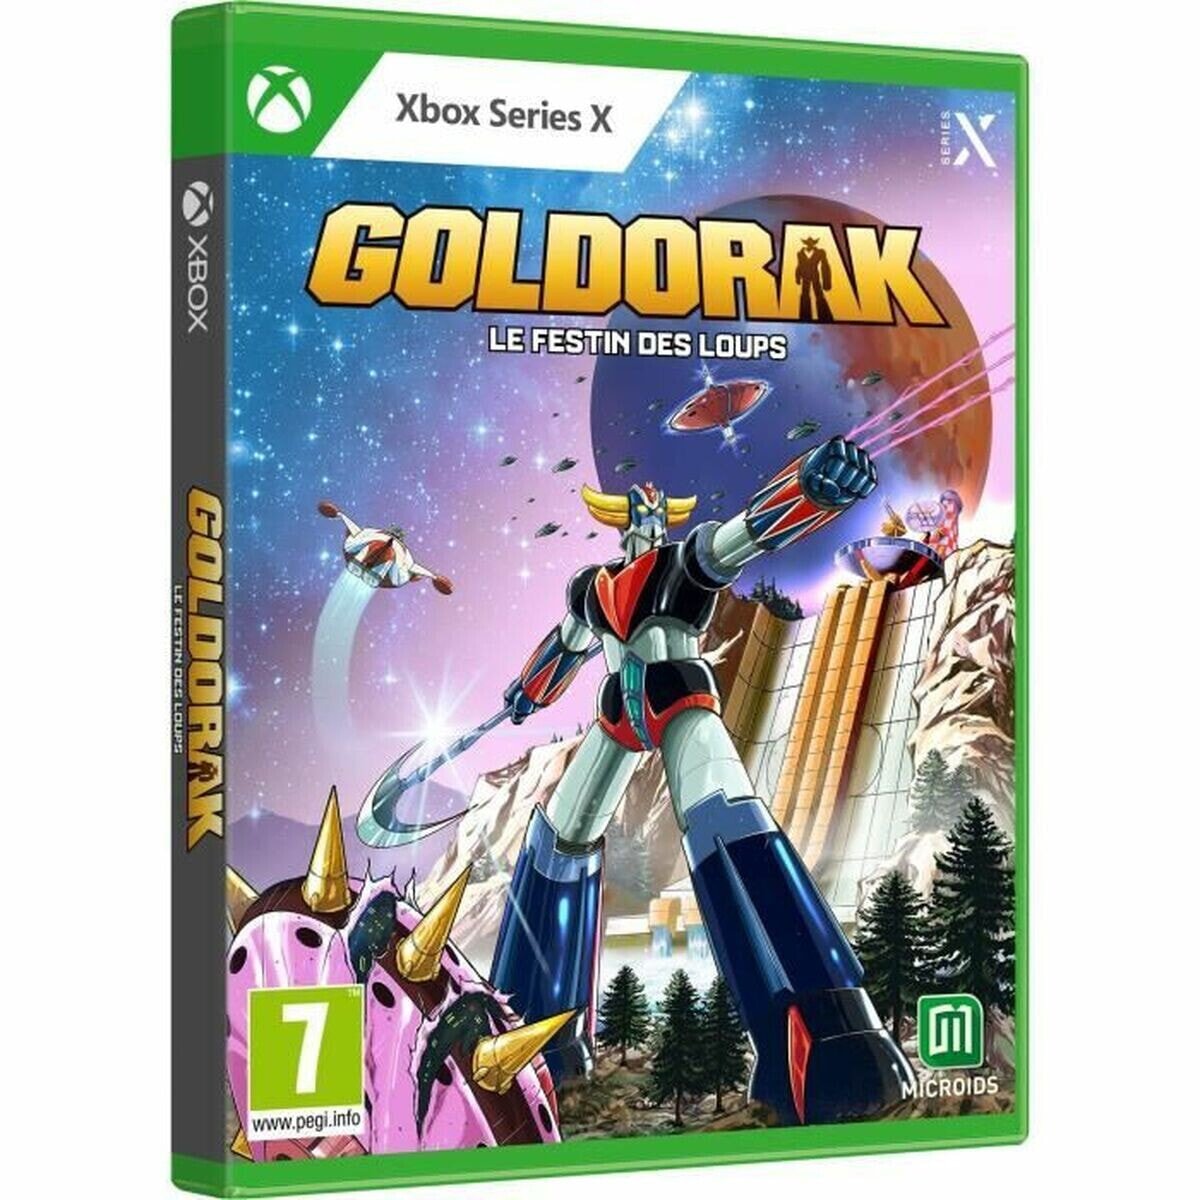 Xbox Series X Video Game Microids Goldorak Grendizer: The Feast of the Wolves - Standard Edition (FR)